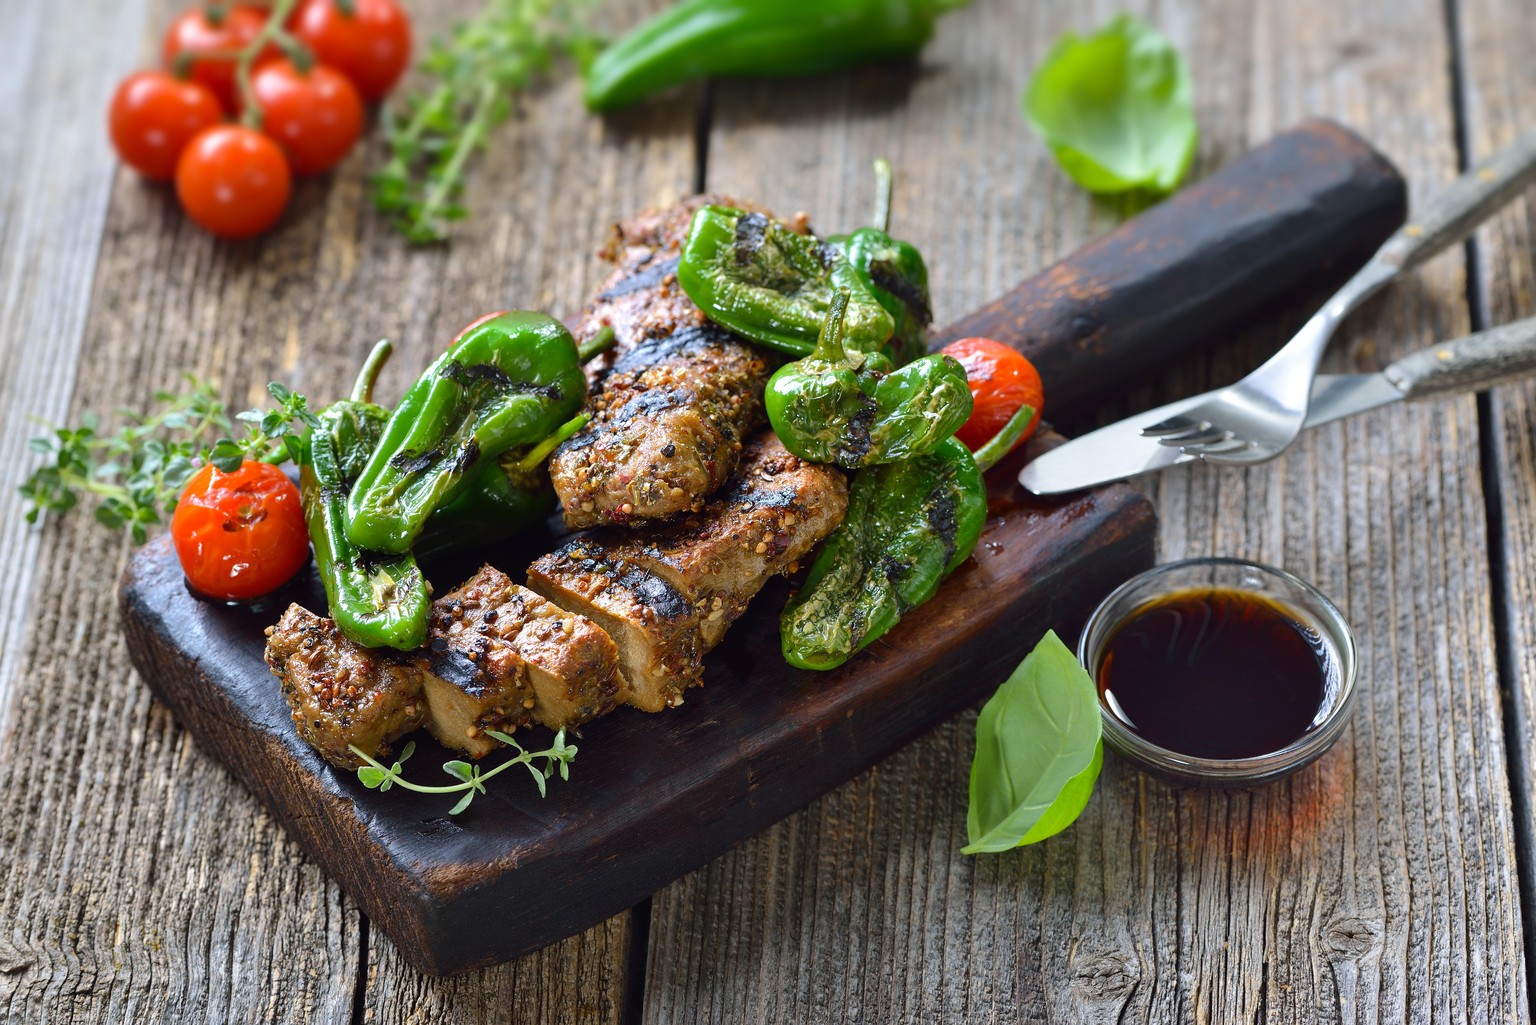 Grilled vegan seitan steaks with pimientos de padron and served with a herb soy sauce on a rustic wooden background